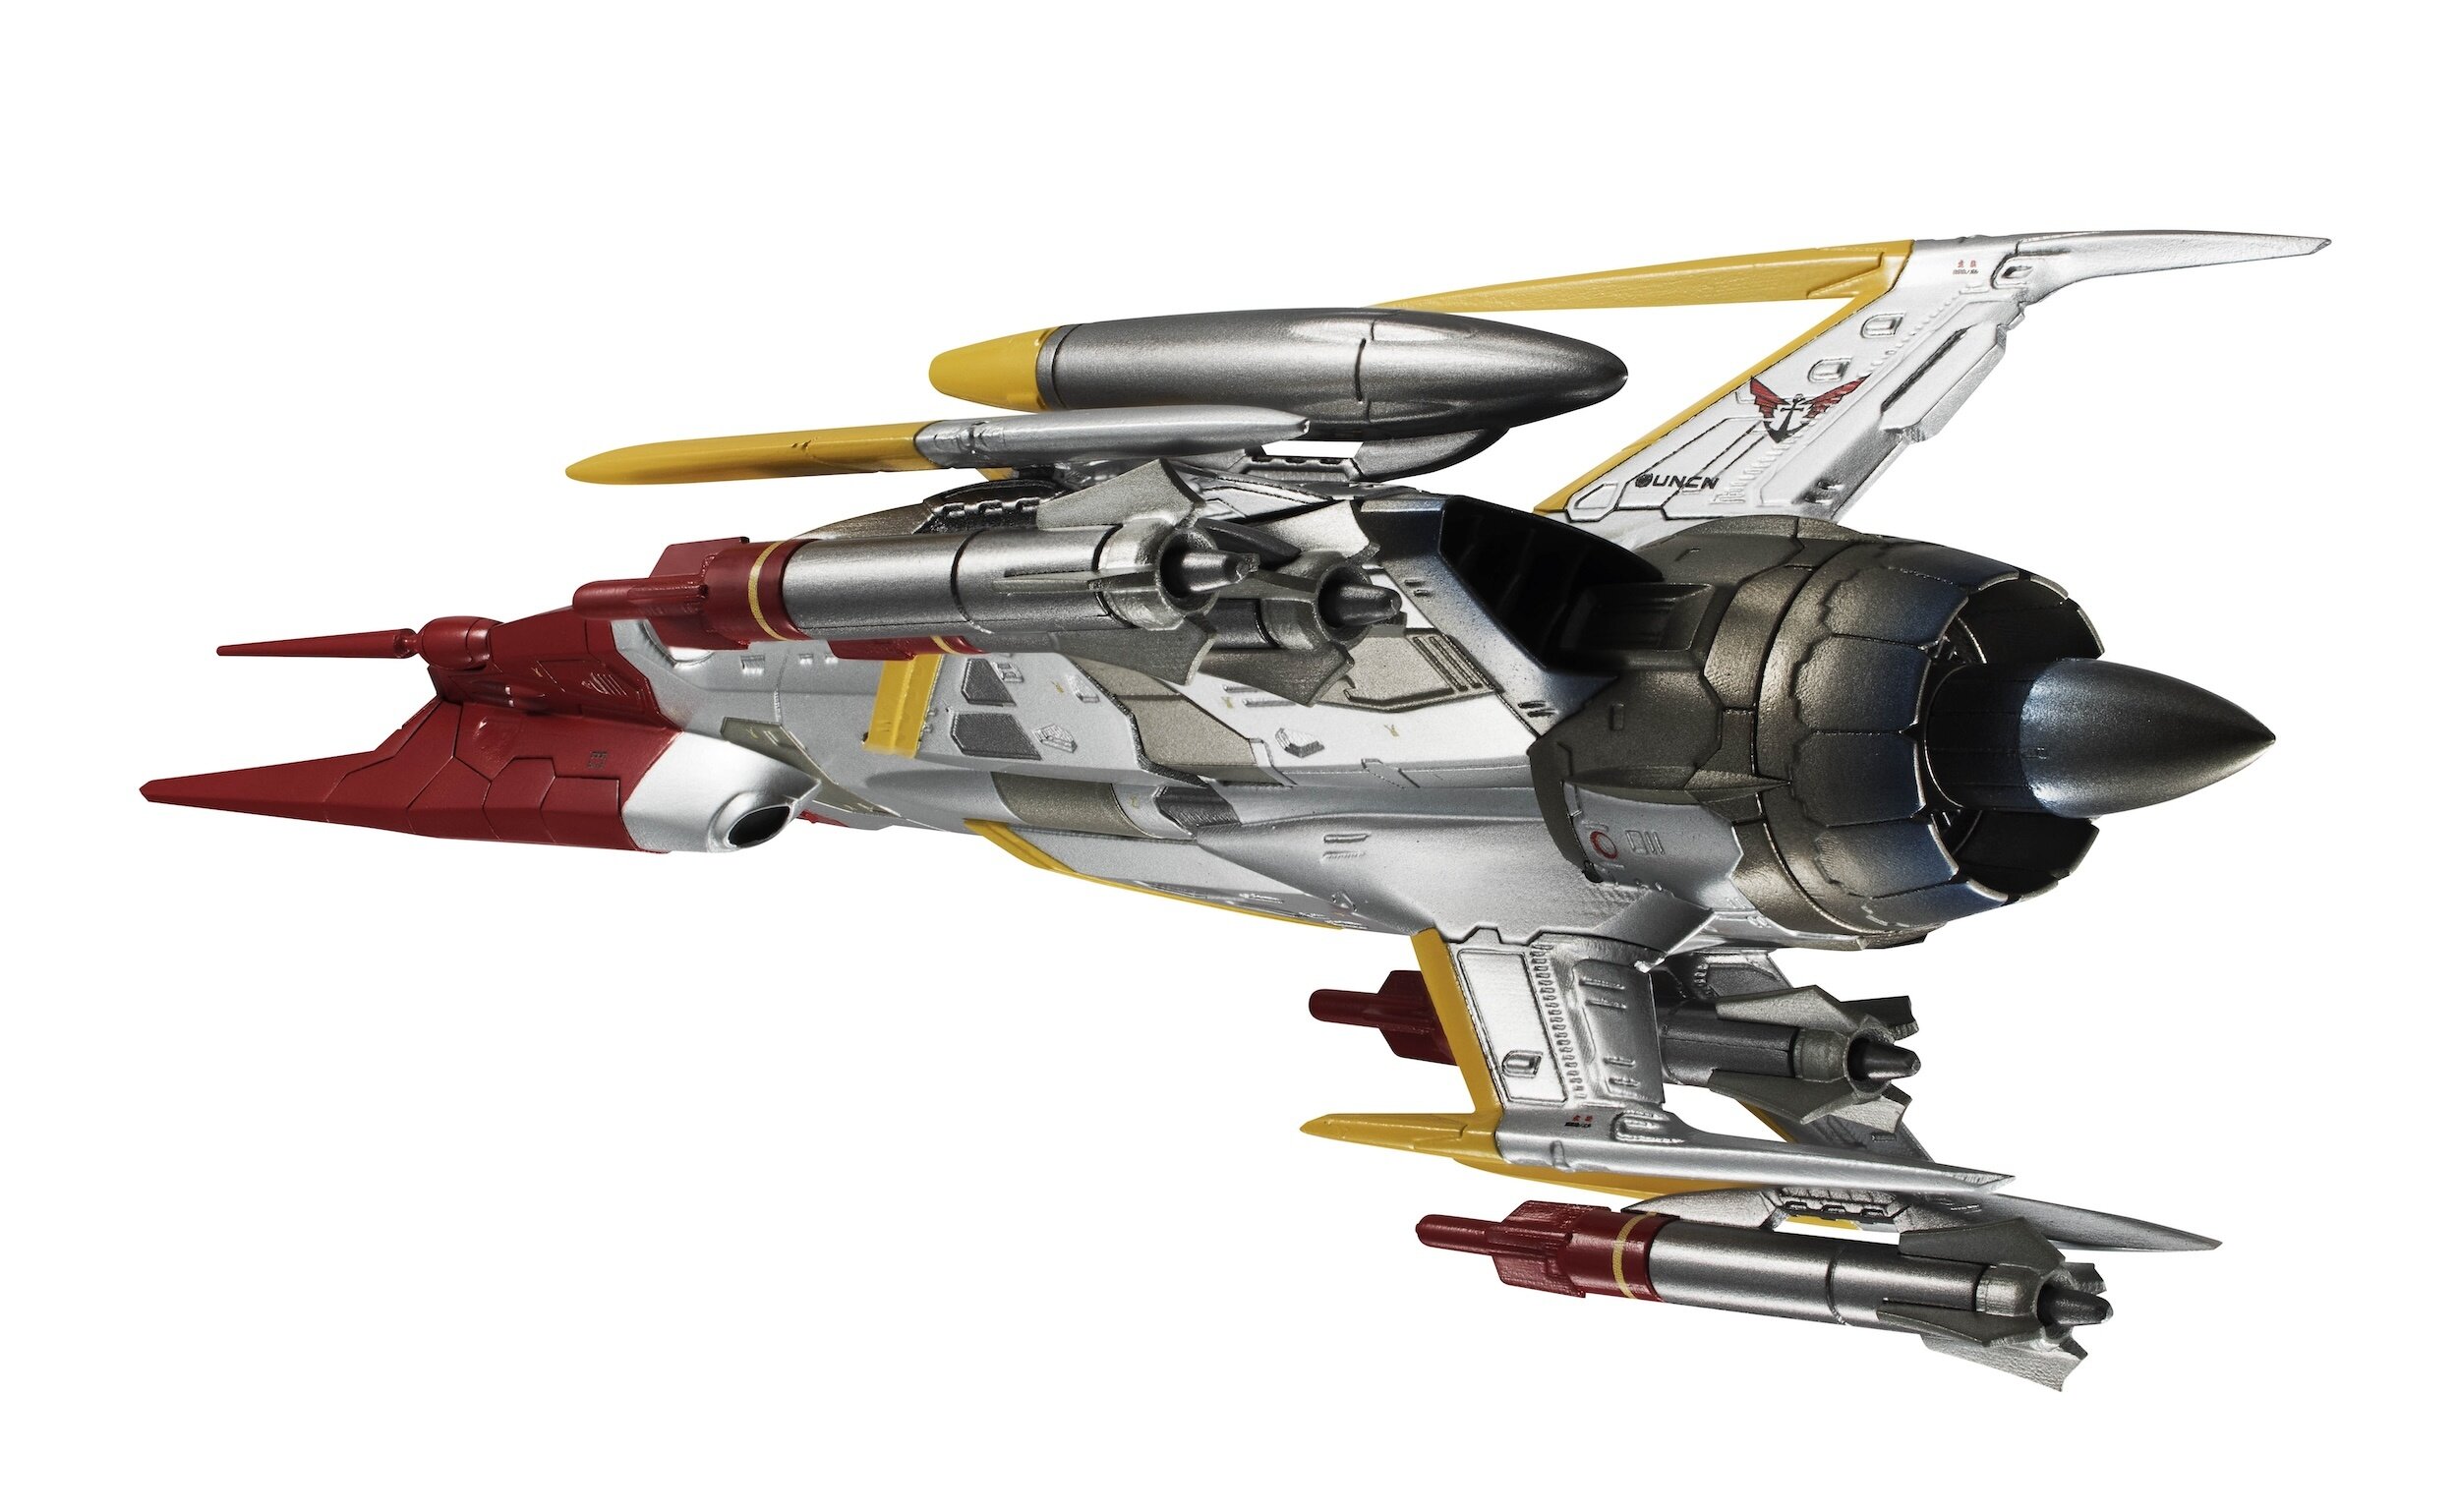 Variable Action Hi-SPEC Space Battleship Yamato 2202：Warriors of Love Type  0 Model 52 Space Carrier Fighter Cosmo Zeroα1 (Re-run)